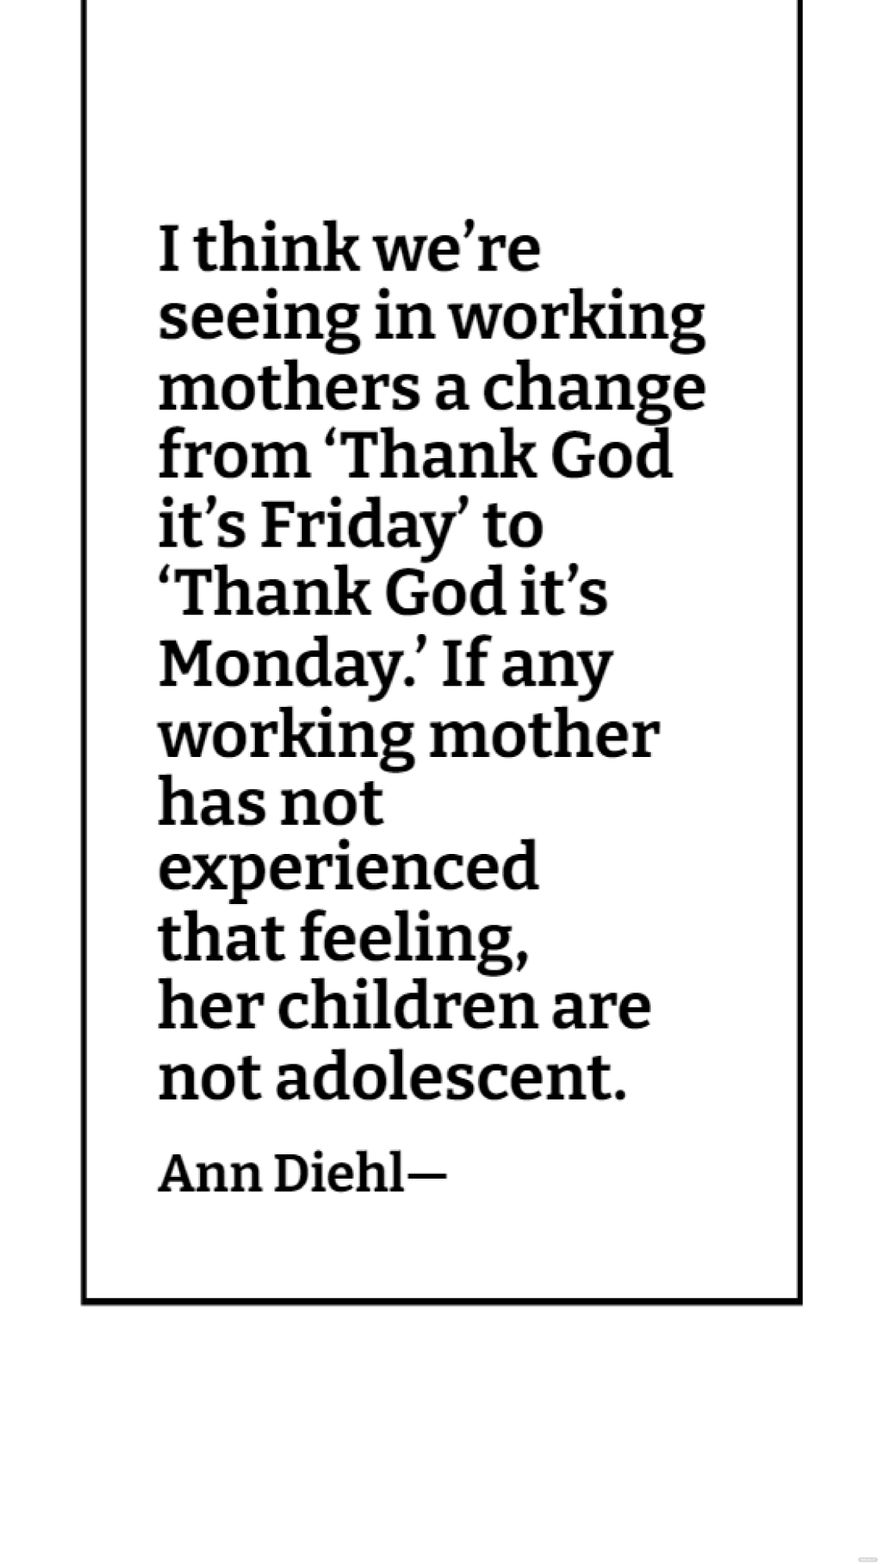 Ann Diehl - I think we’re seeing in working mothers a change from ‘Thank God it’s Friday’ to ‘Thank God it’s Monday.’ If any working mother has not experienced that feeling, her children are not adole